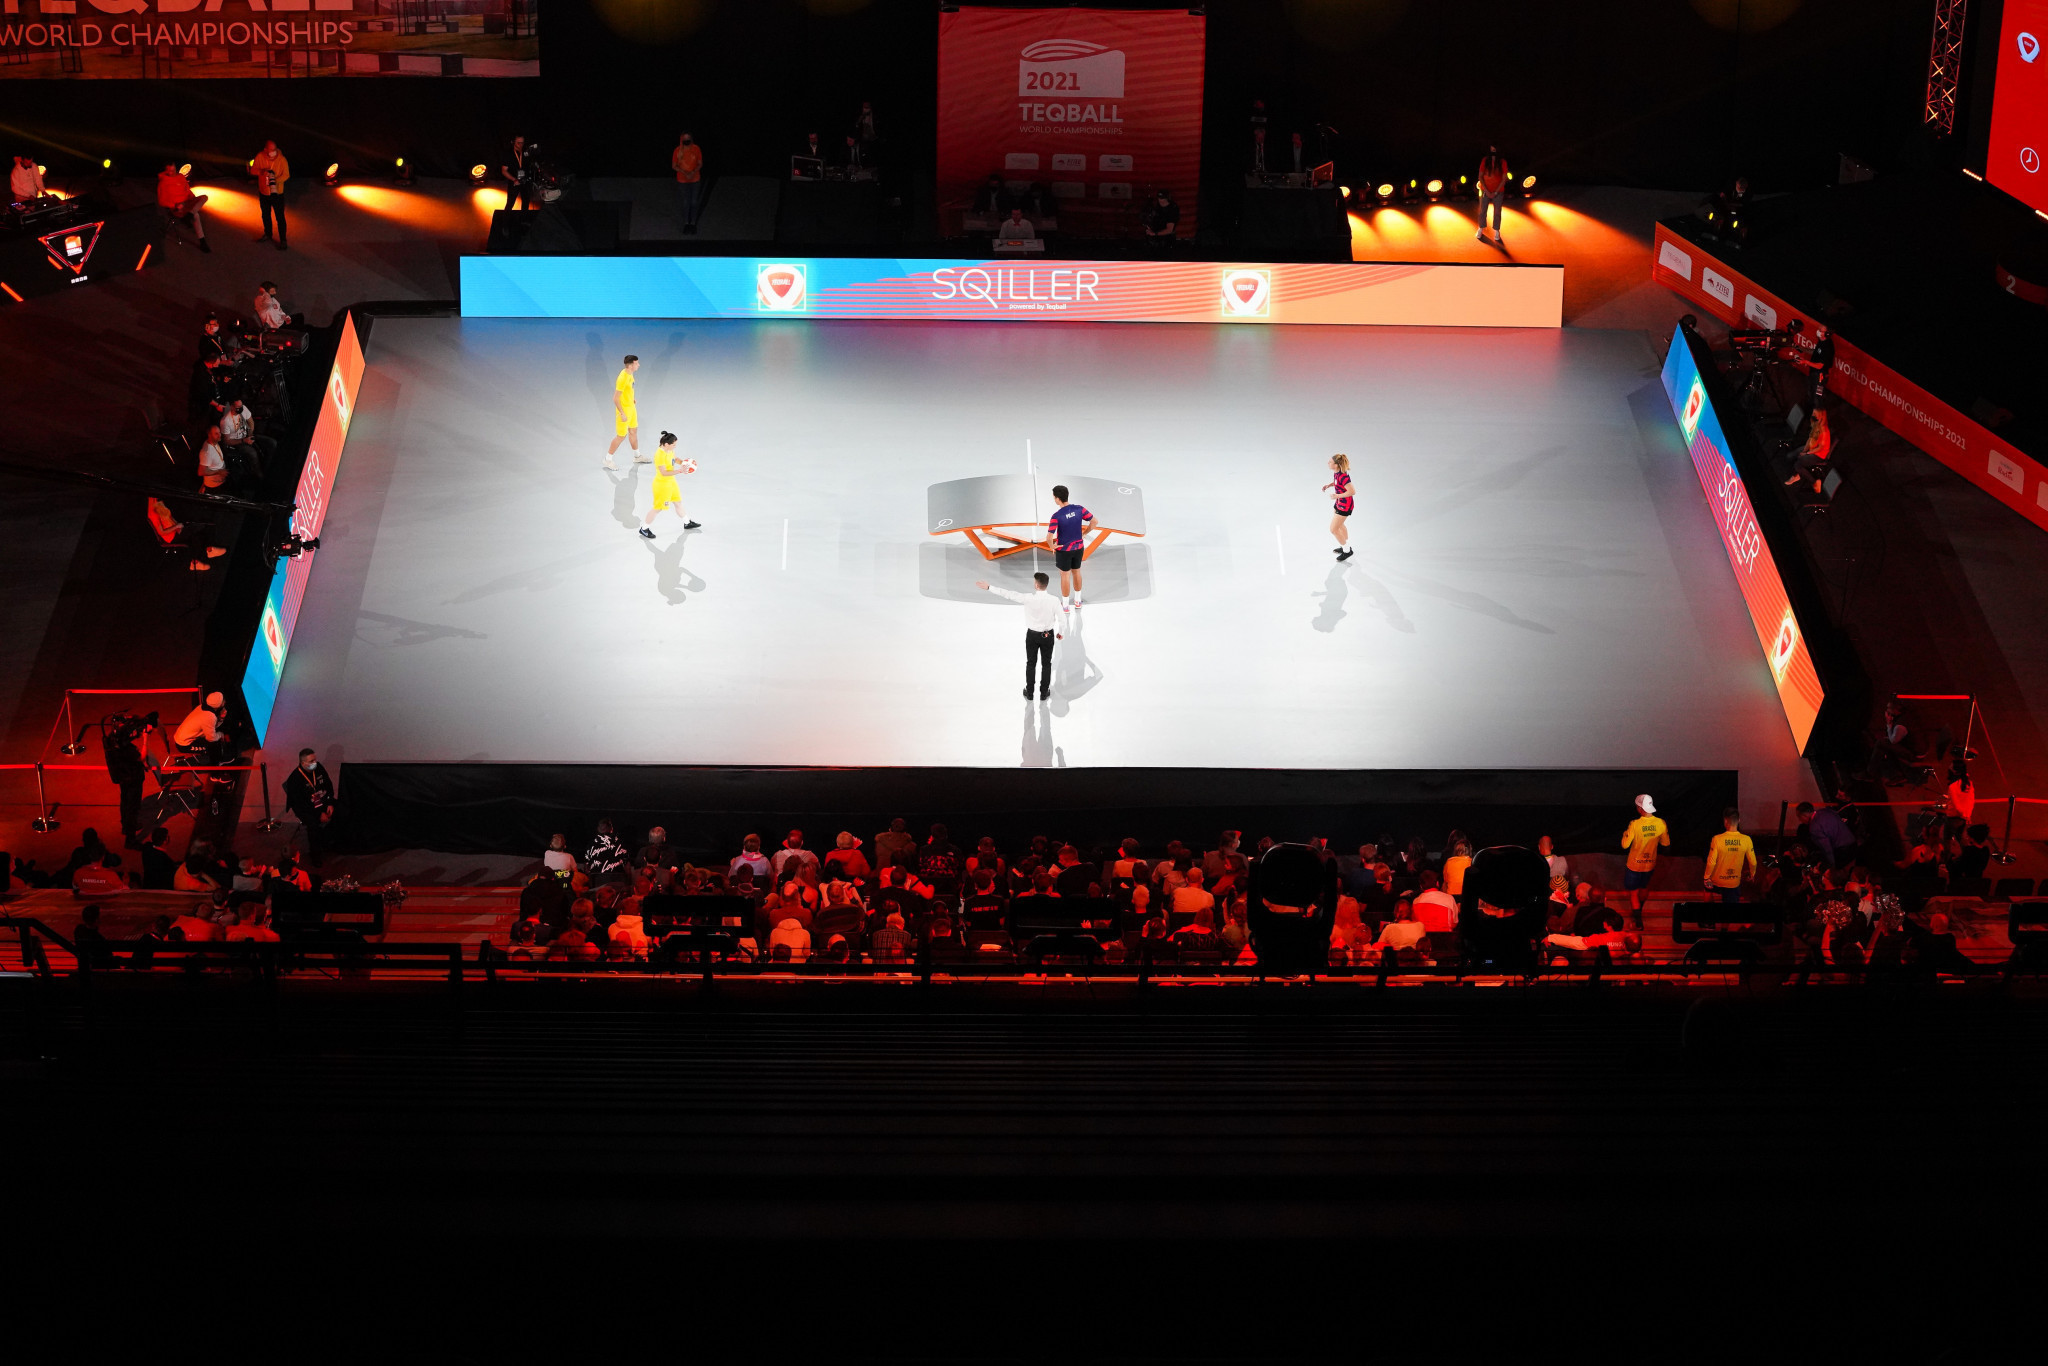 Mixed doubles action took place today at the Teqball World Championships ©FITEQ